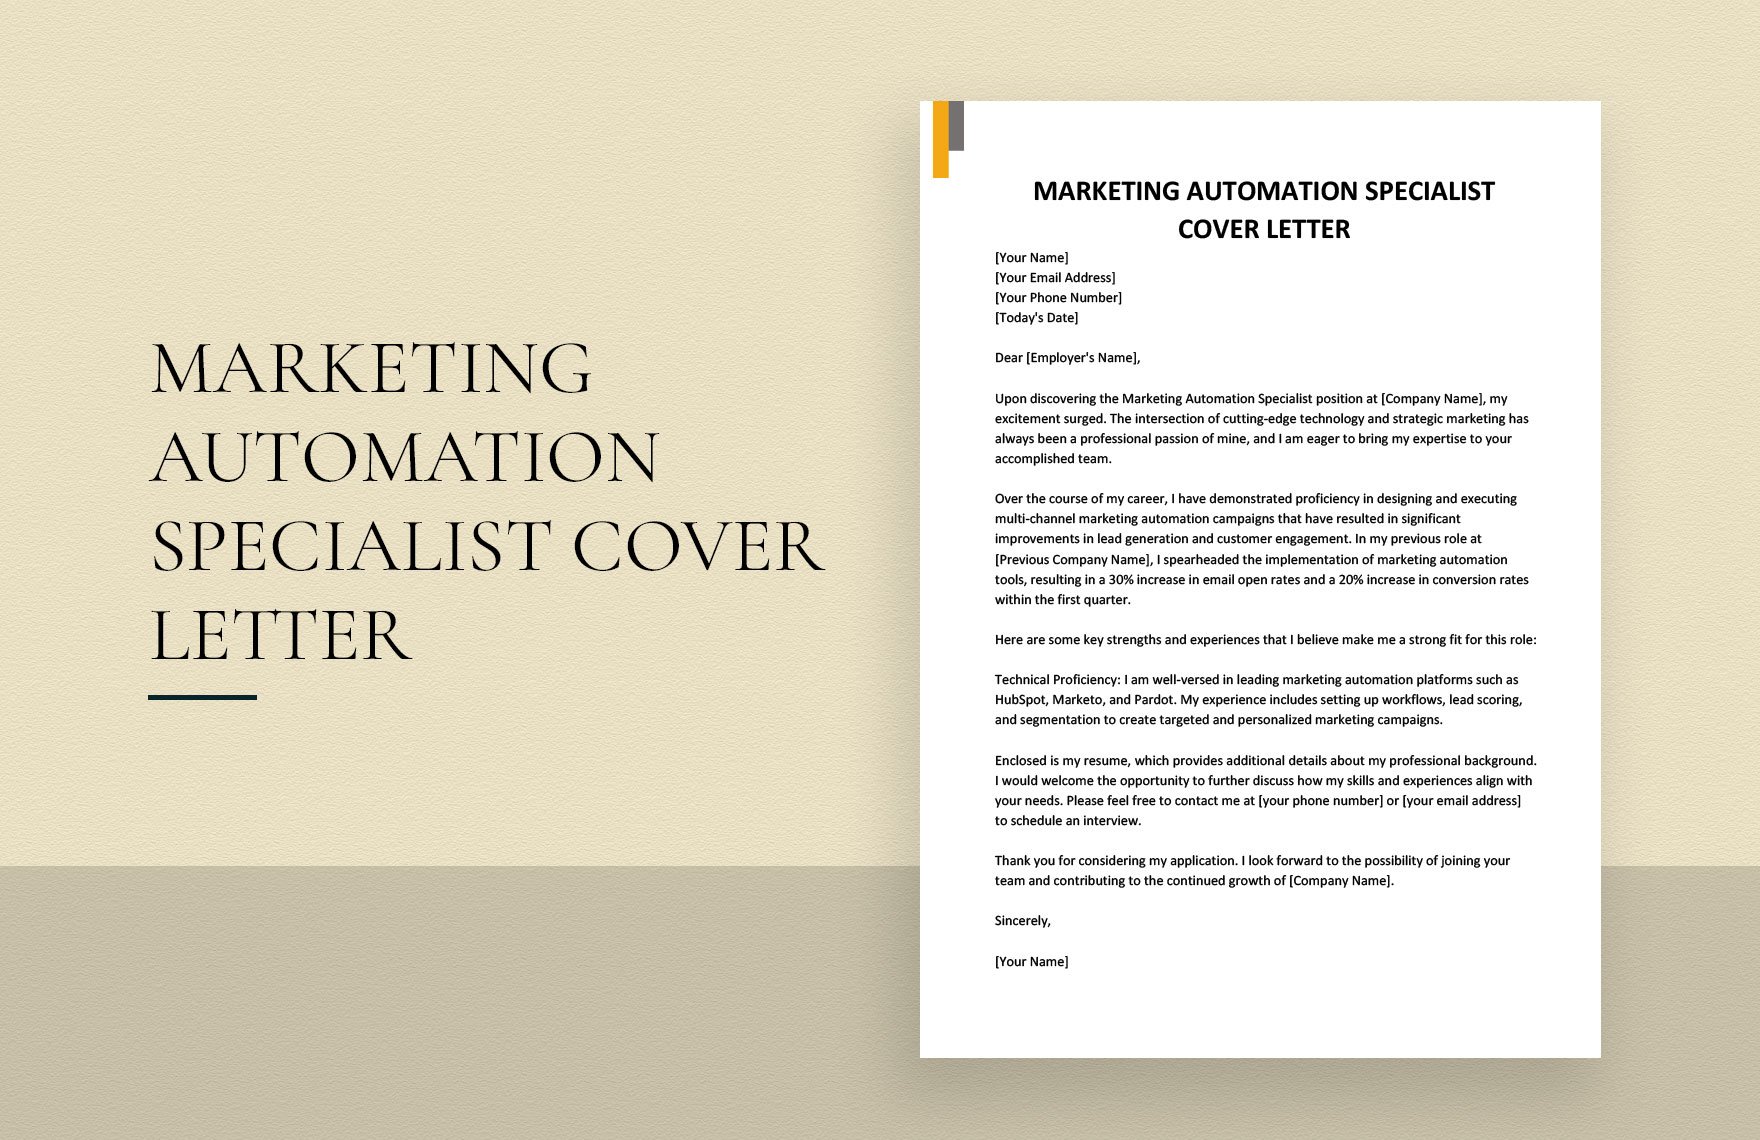 Marketing Automation Specialist Cover Letter in Word, Google Docs